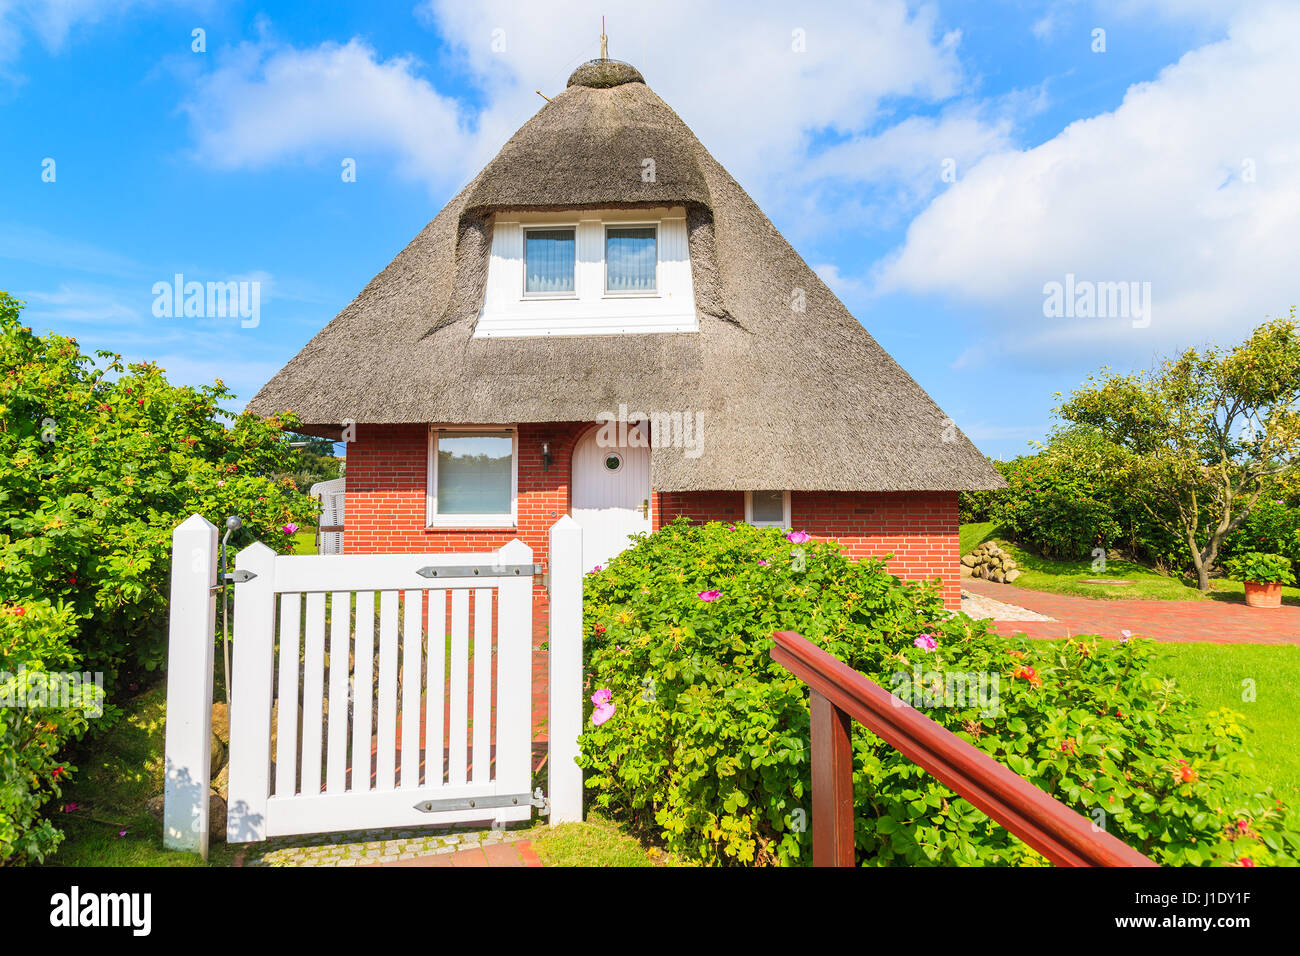 Typical red brick house in Westerheide village with straw roof, Sylt island, Germany Stock Photo